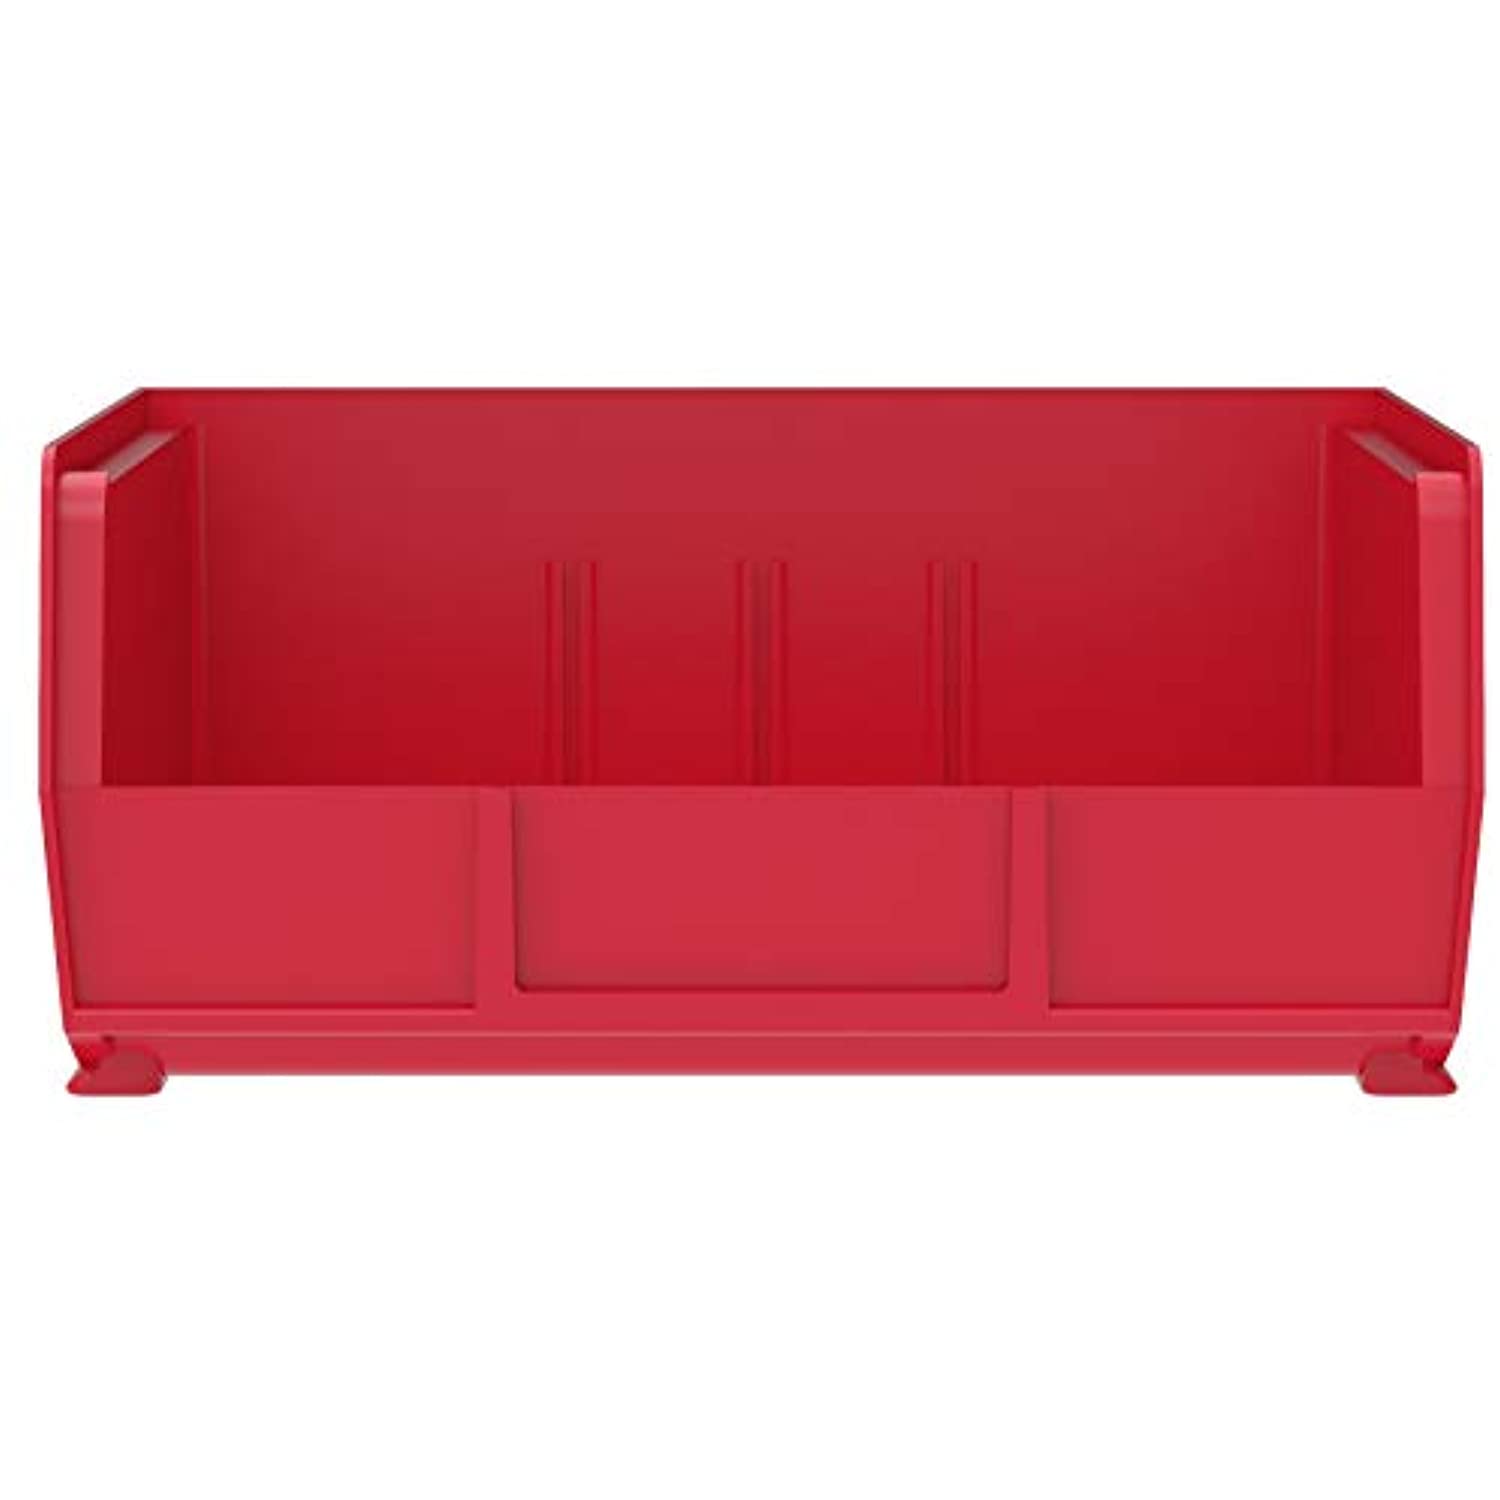 Stacking Plastic Storage Bin Container Set of 6 Akro-Mils 30235 AkroBins, Red - image 3 of 12